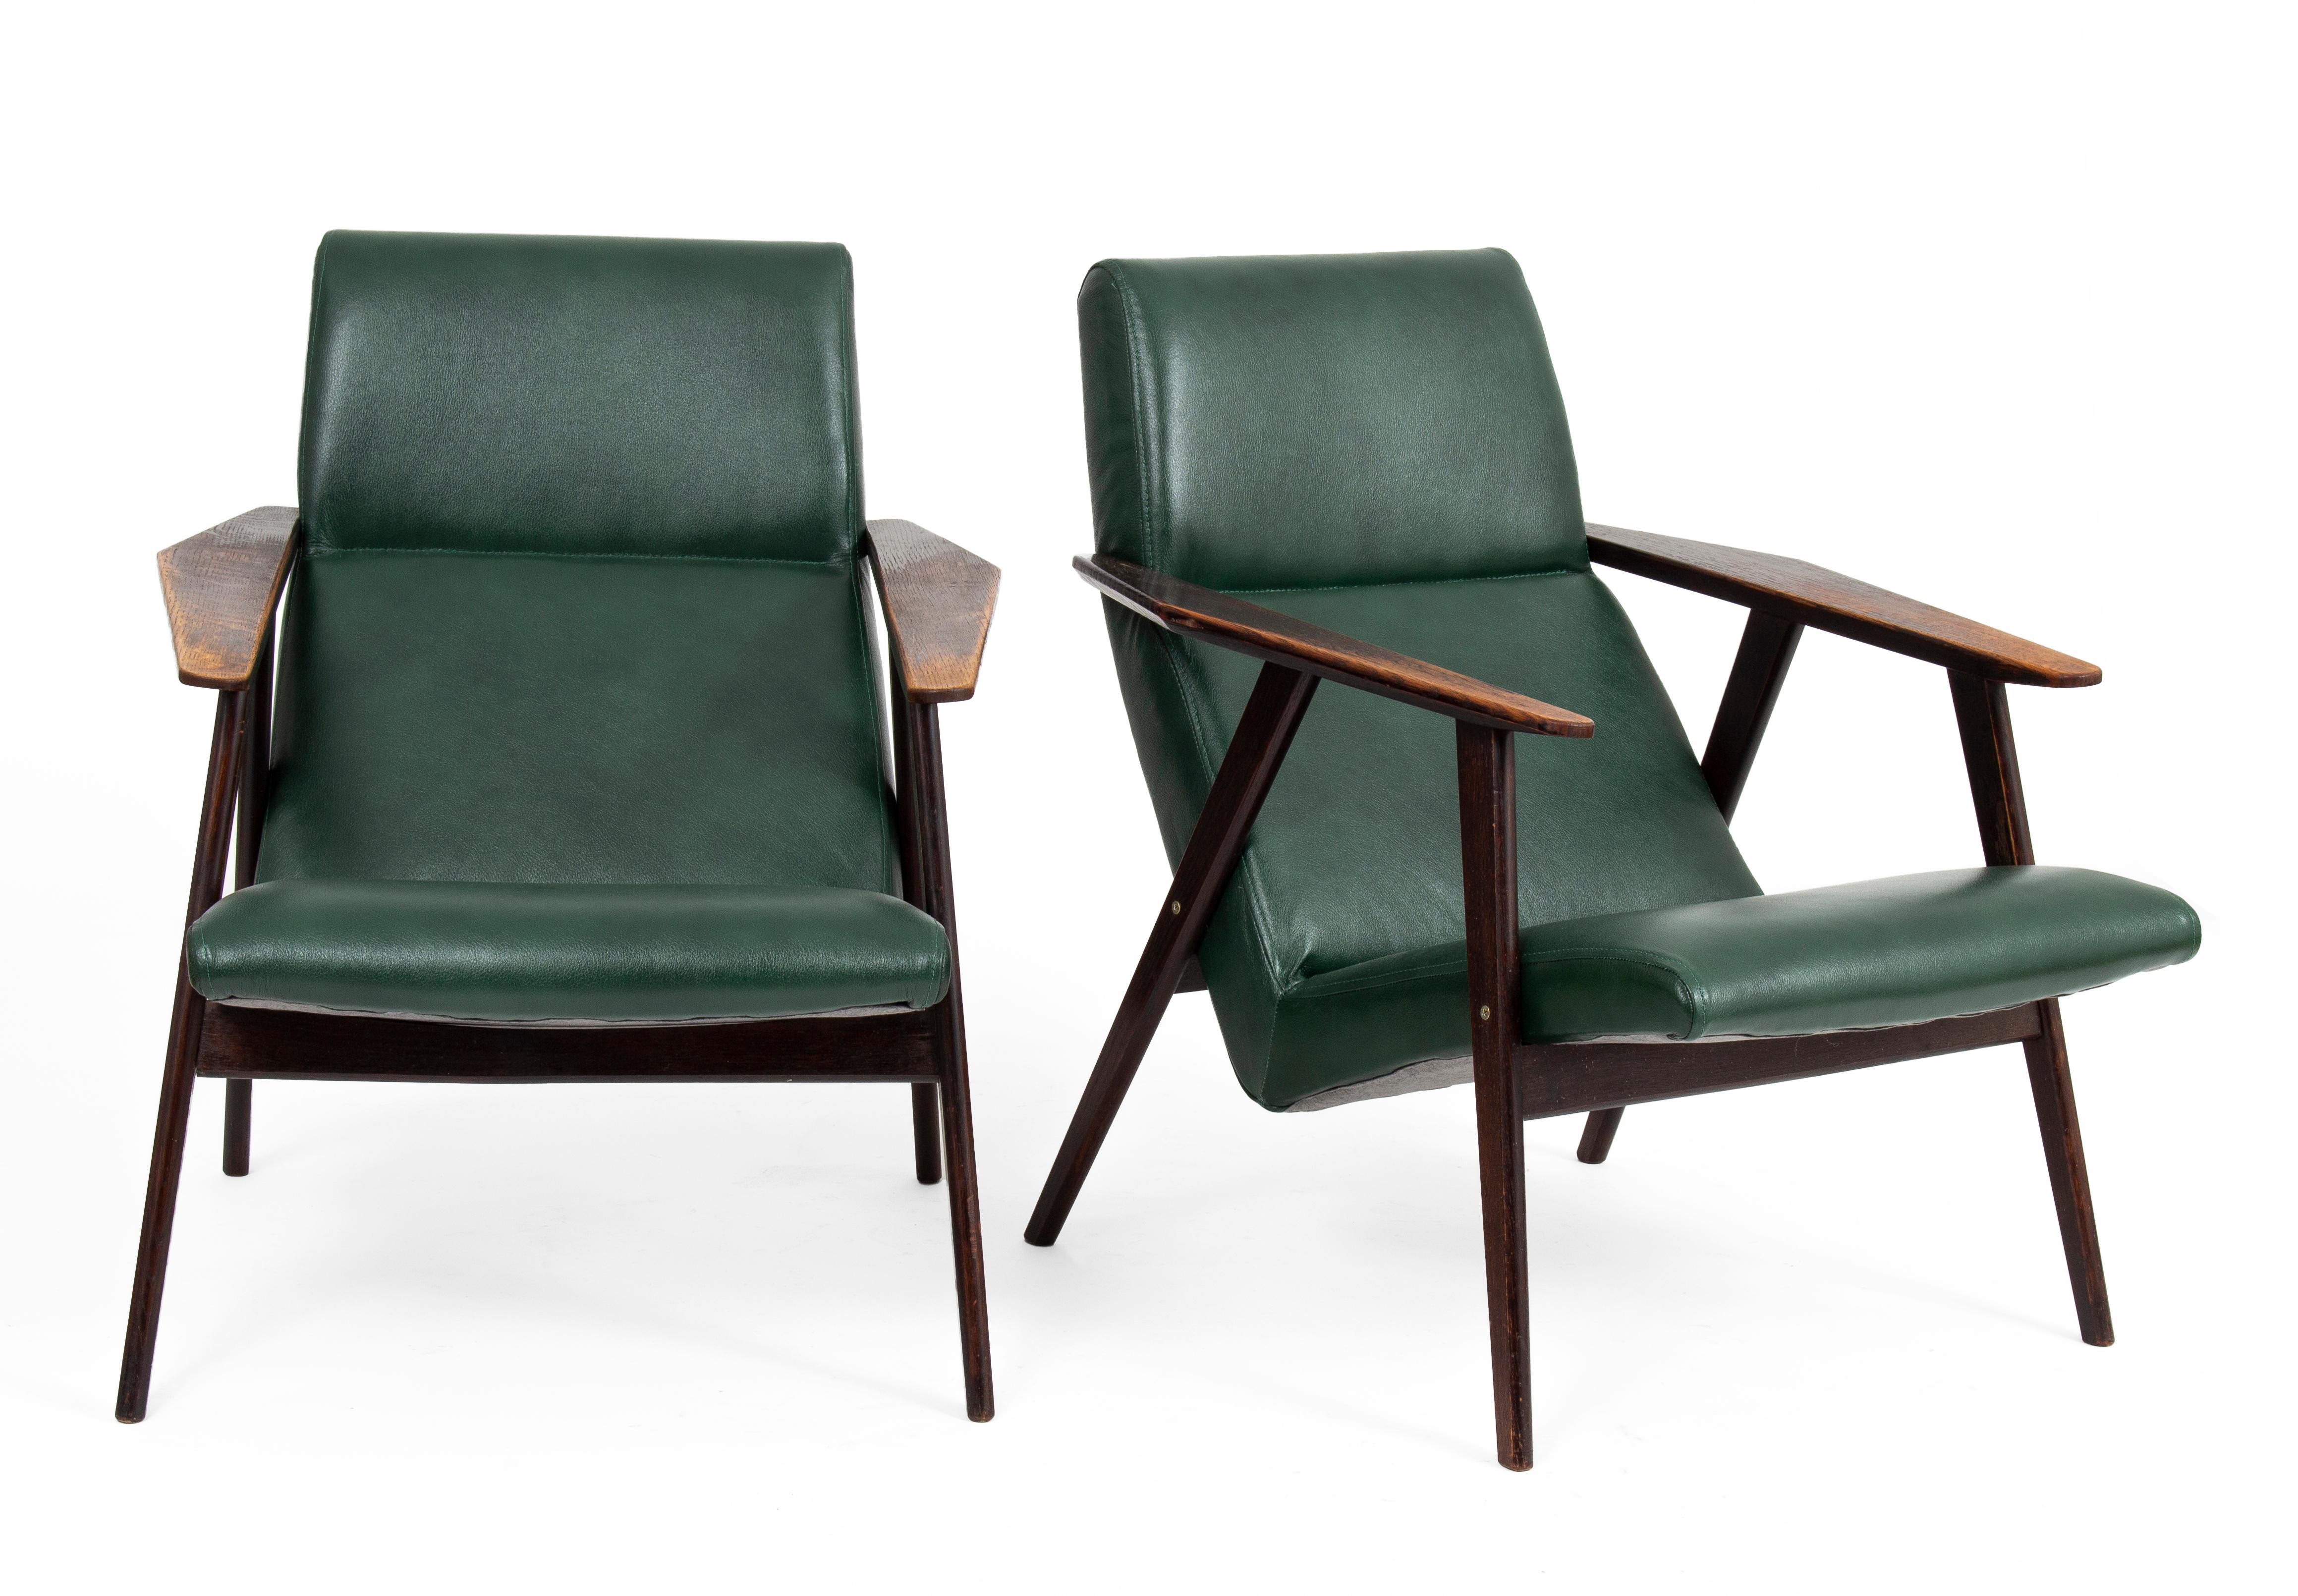 Mid-century modern armchairs in pairs from the 1960s.

The original solid and comfortable structure has been honored with a new dark green leather upholstery. The elegant yet funky design fits modern and contemporary interiors.

